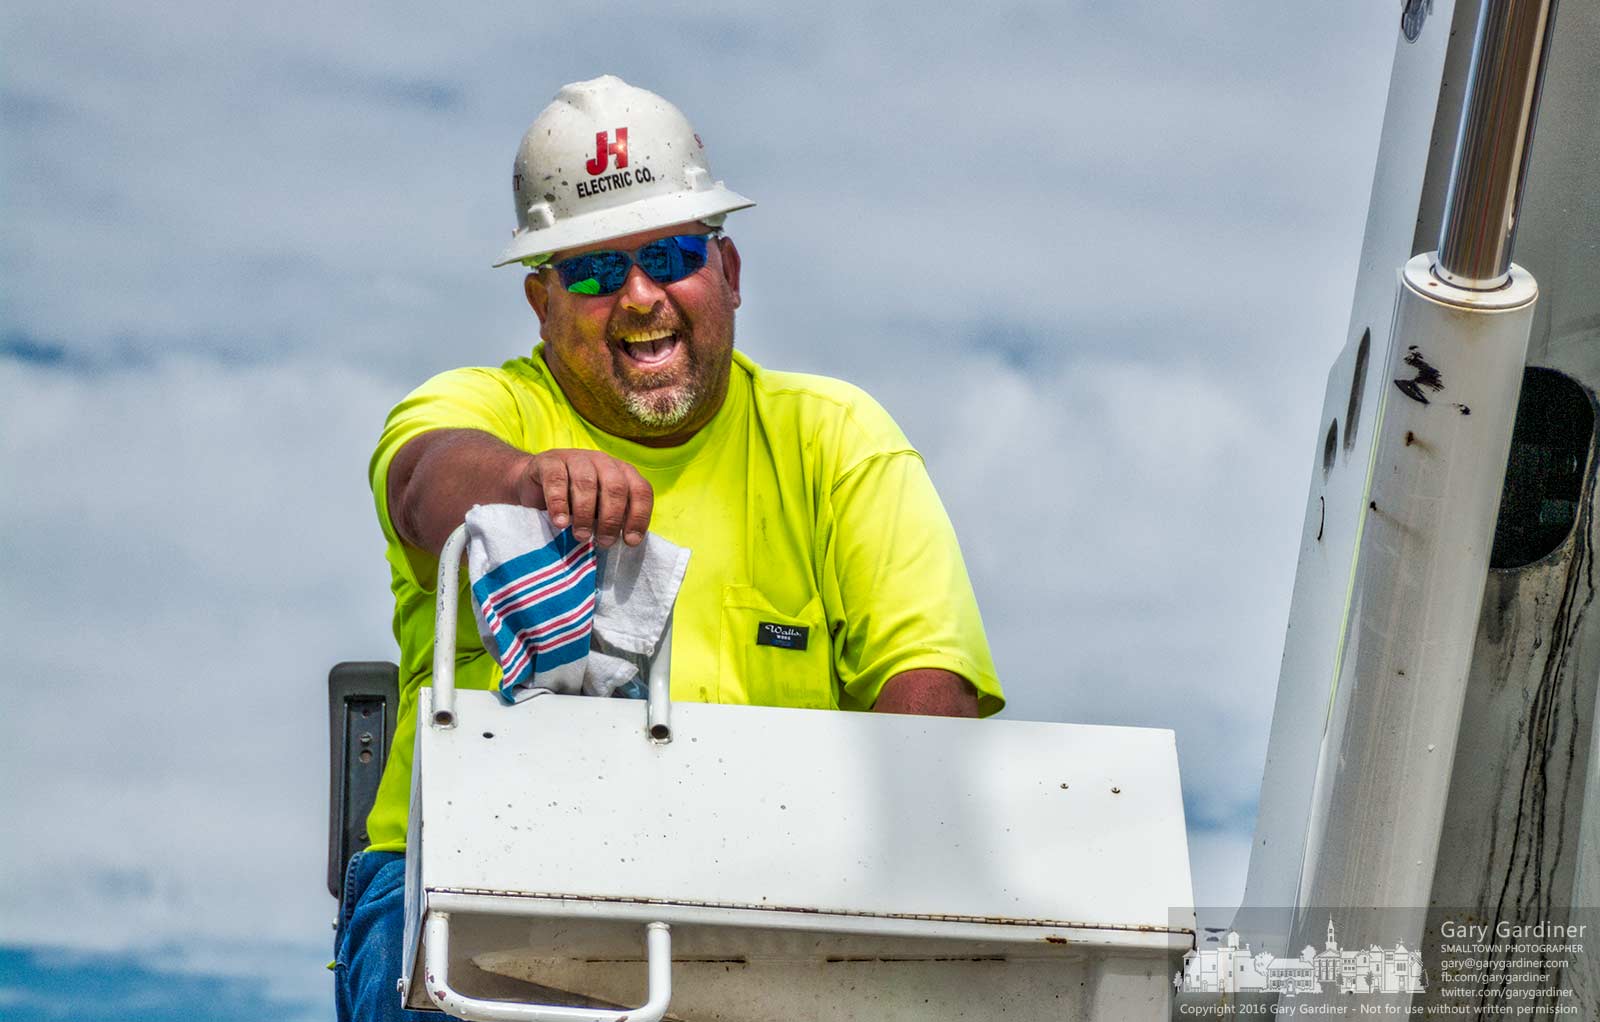 A crane operator breaks into a smile when on the receiving end of joke by his coworker as they install new light poles on State Street near Schrock. My Final Photo for August 16, 2016.